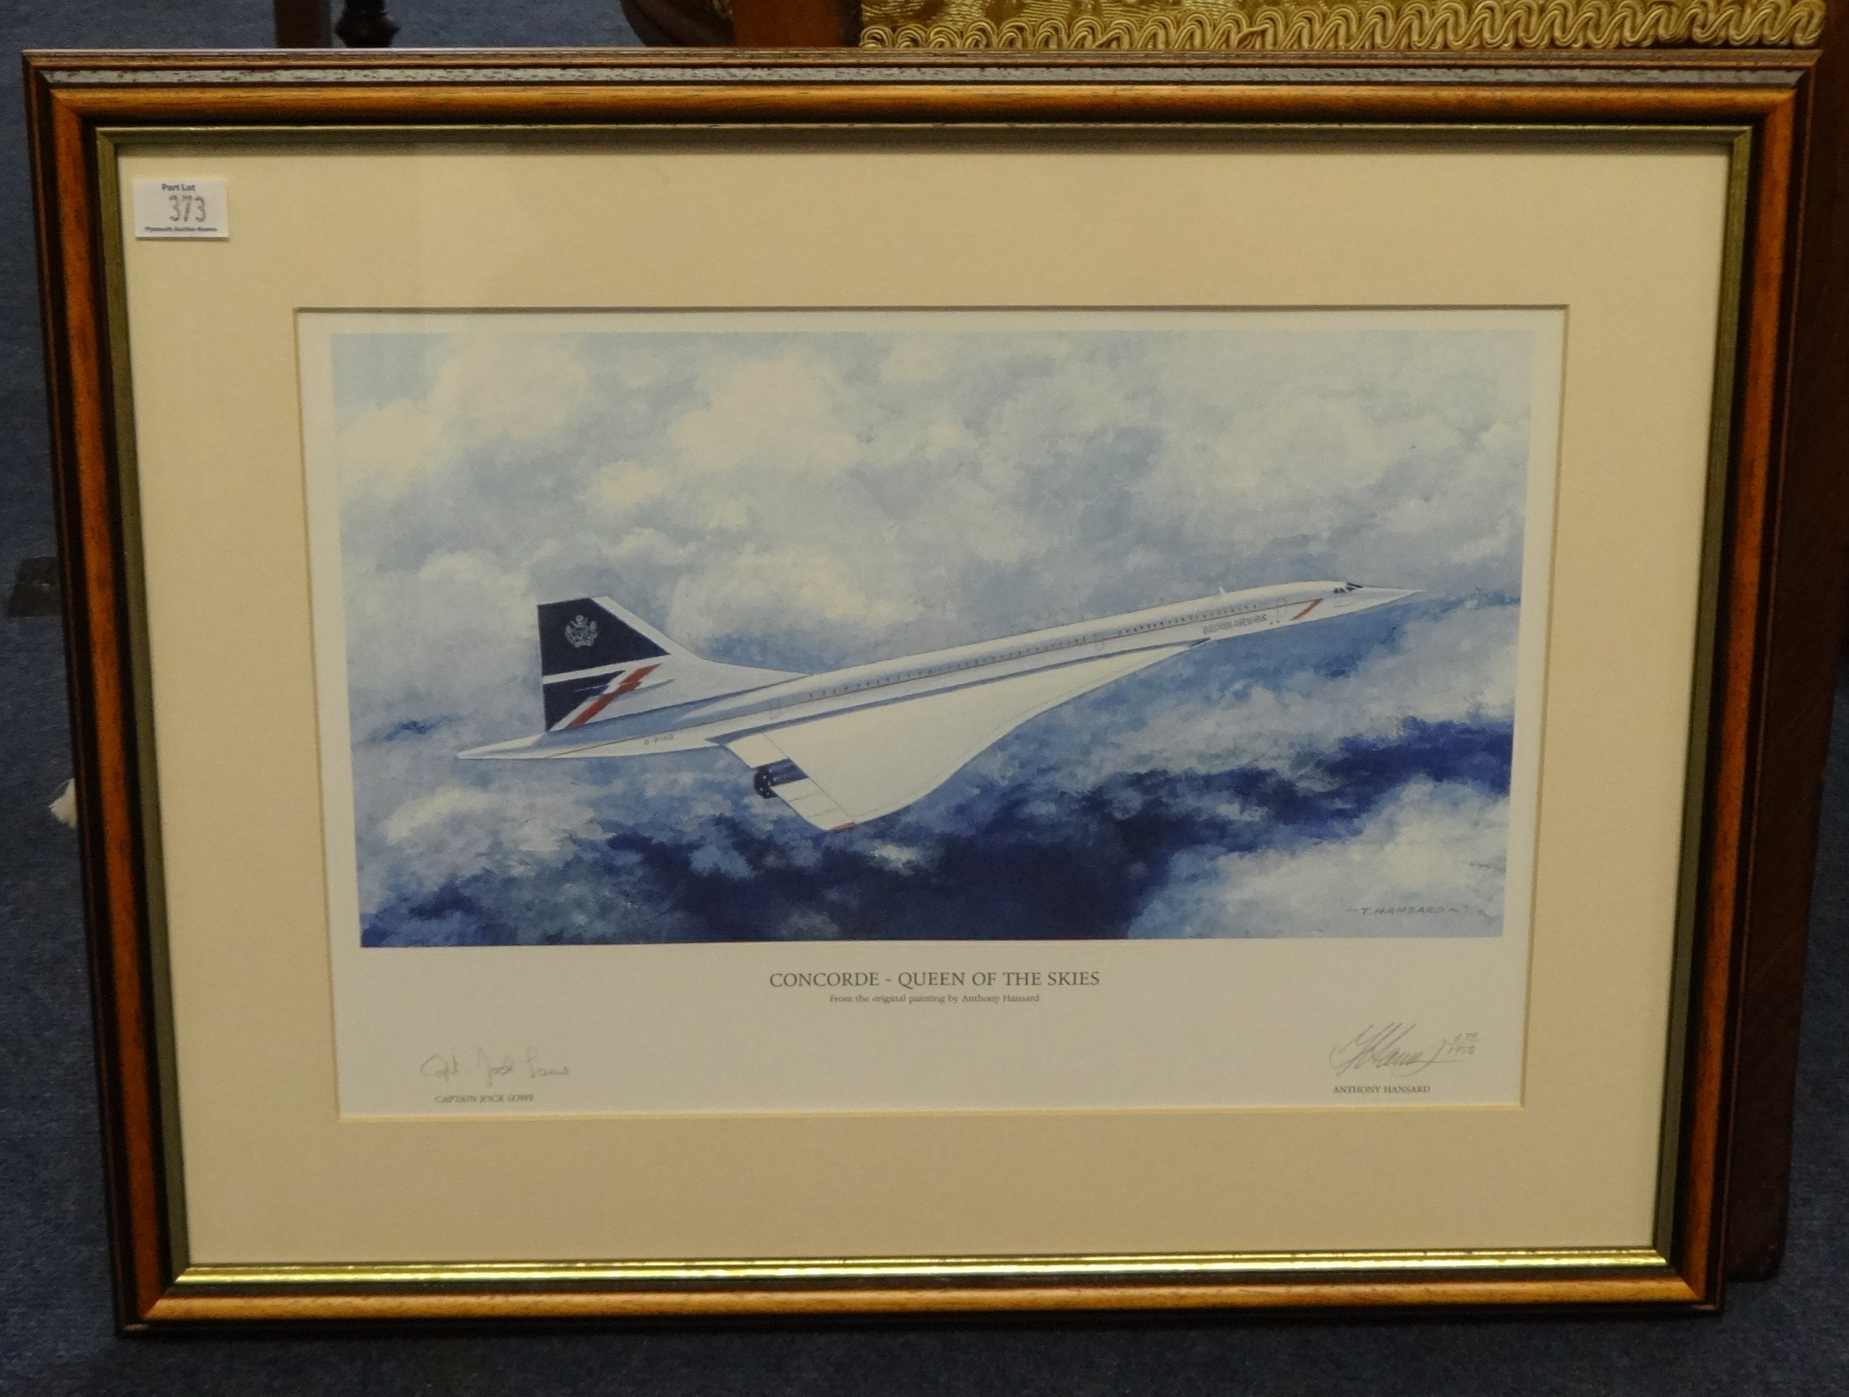 DAVID KEARNEY print 'Perfect Timing' 163/1950 t/w Concorde- Queen Of The Skies' (2) - Image 2 of 2